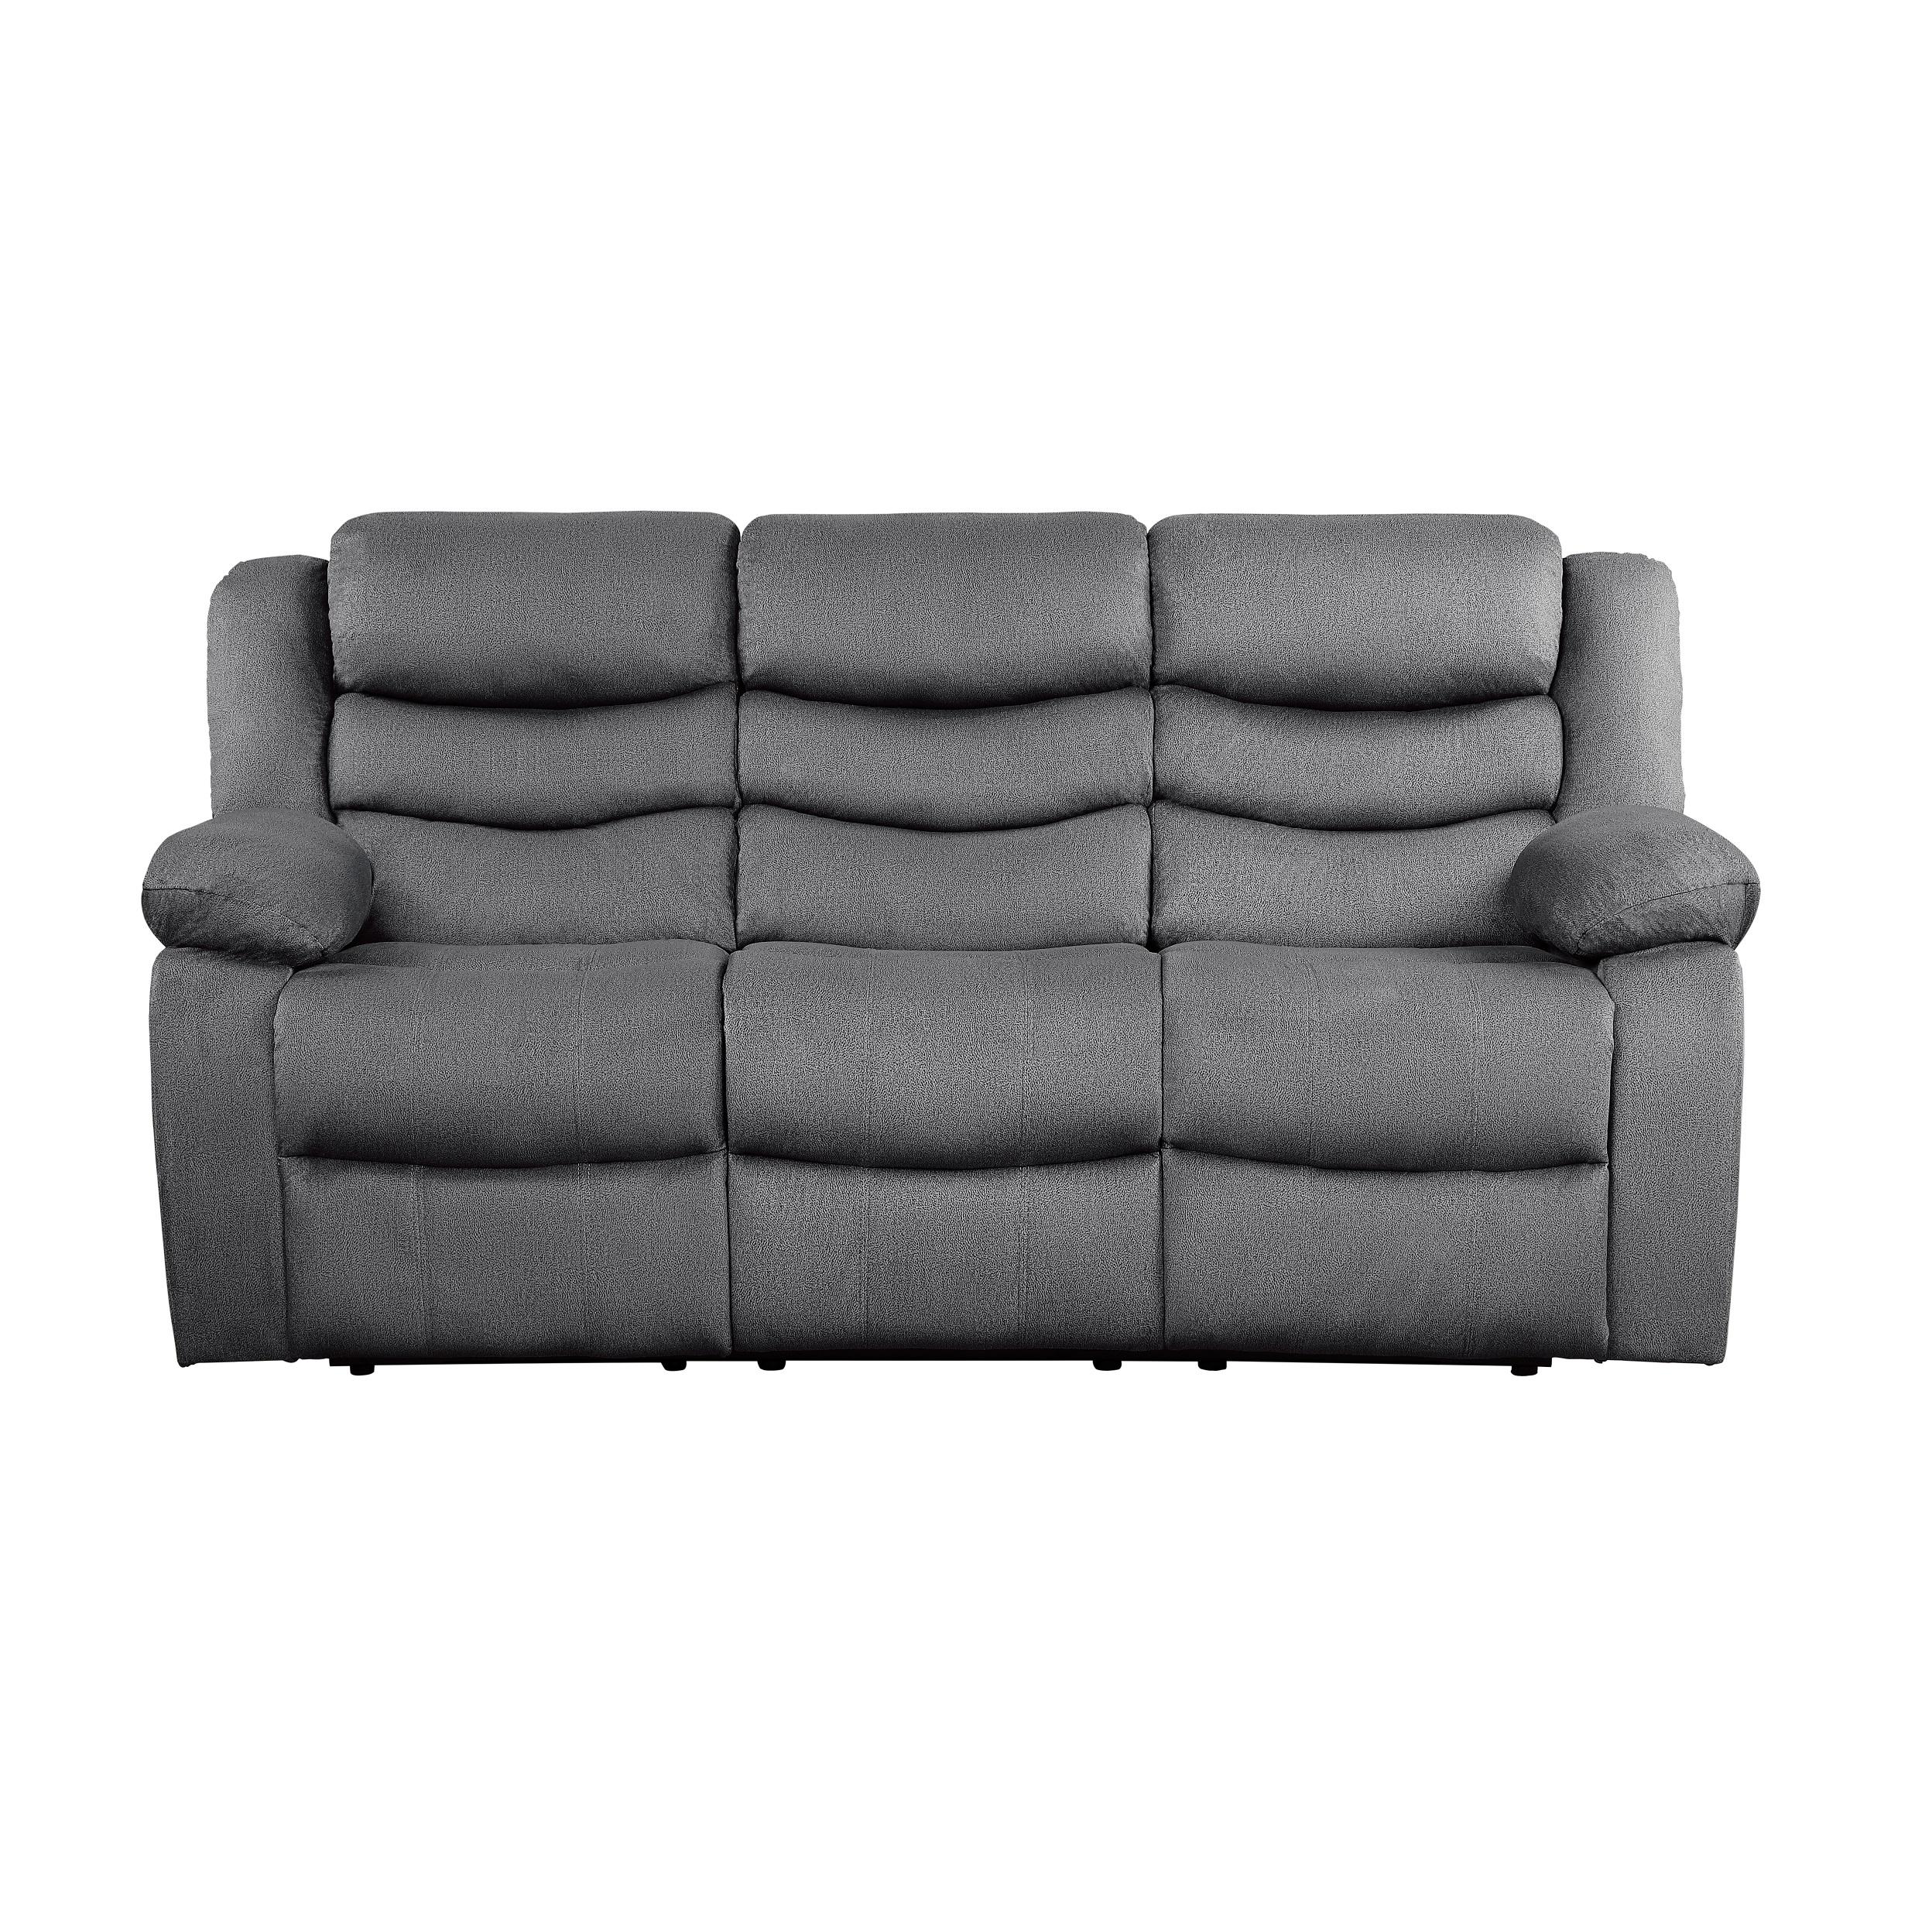 Homelegance 9526GY-3 Discus Reclining Sofa